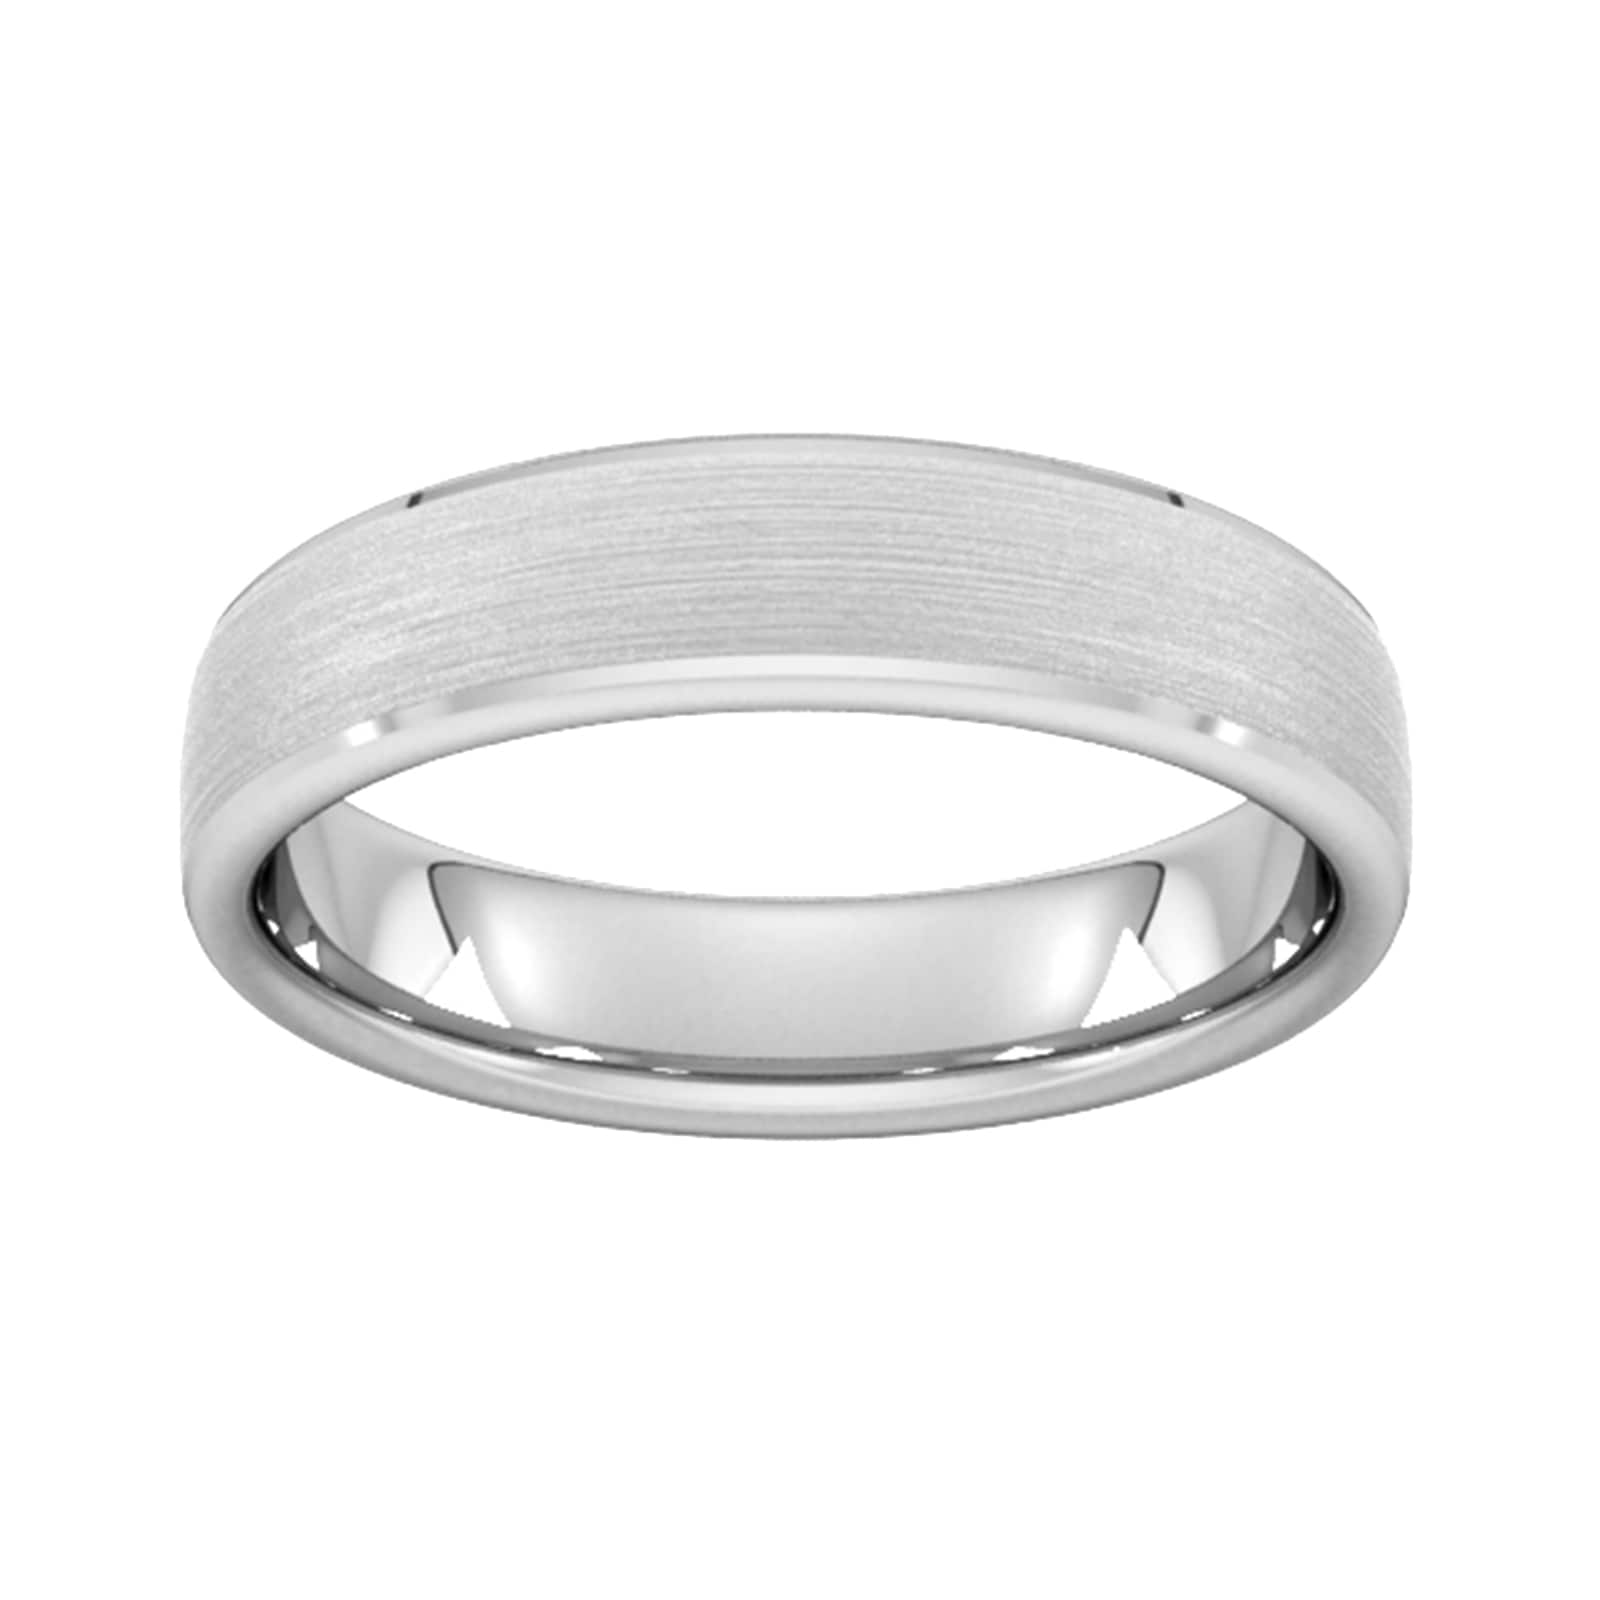 5mm Traditional Court Standard Polished Chamfered Edges With Matt Centre Wedding Ring In 18 Carat White Gold - Ring Size J